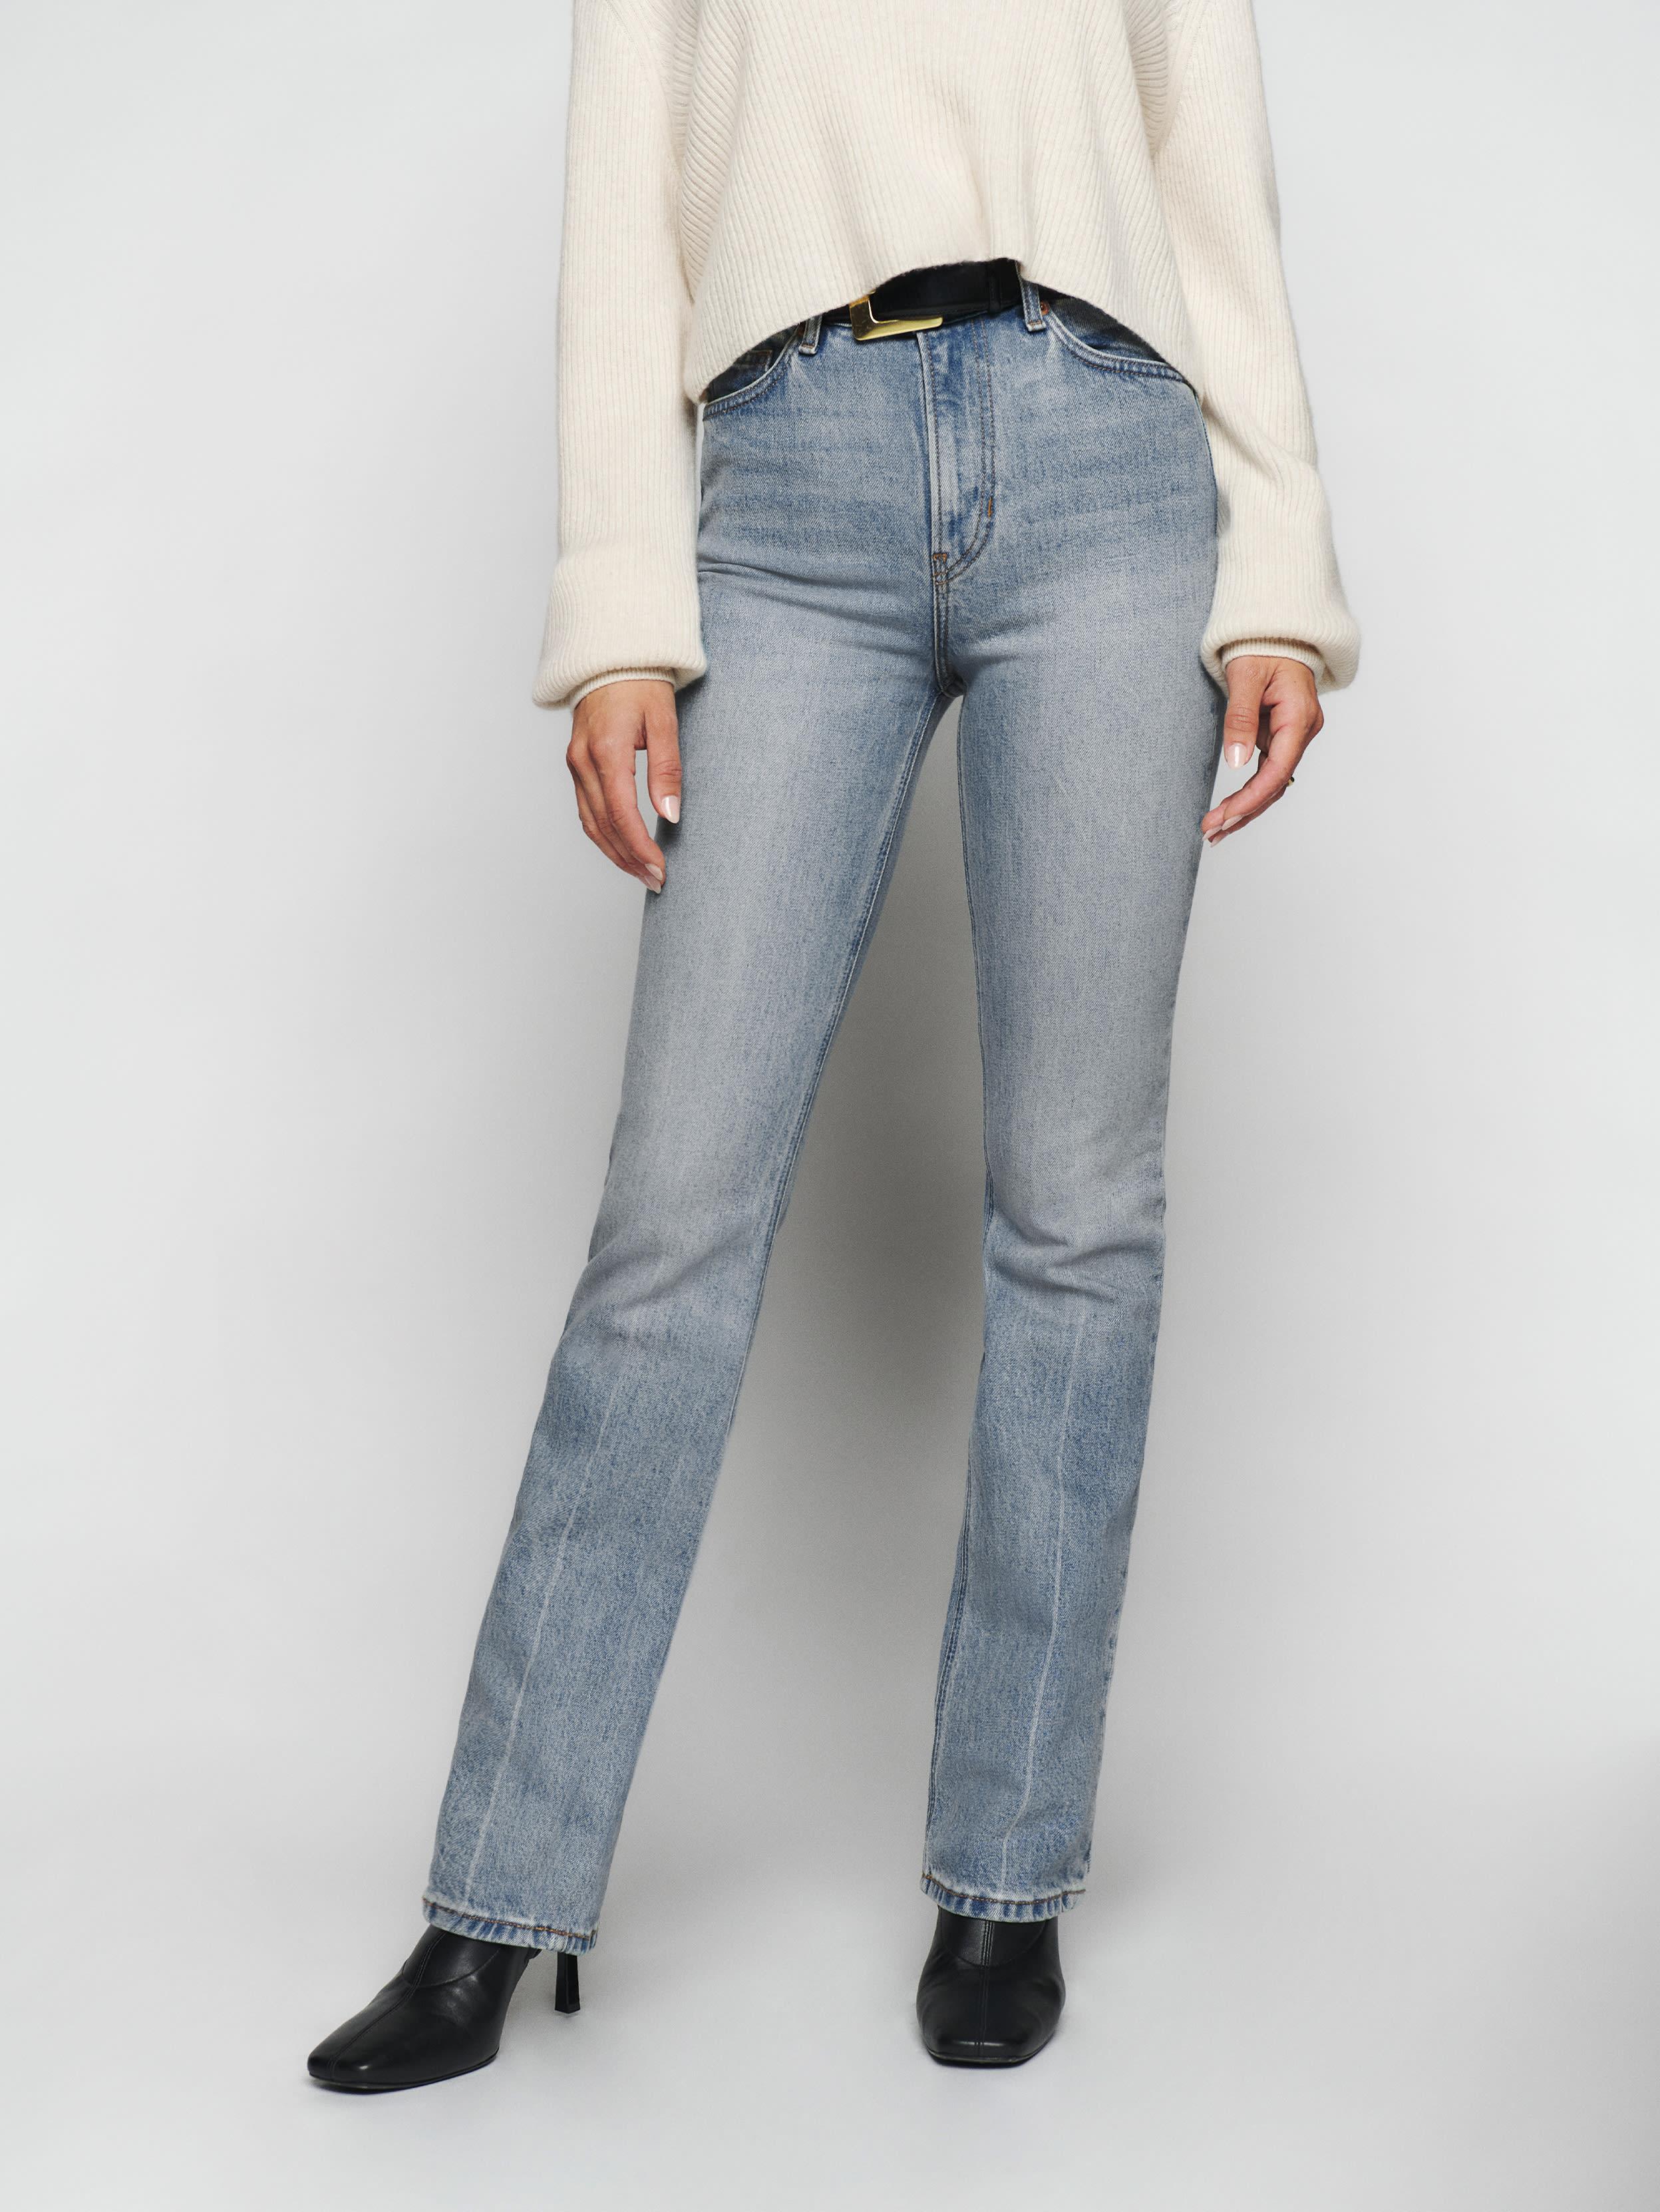 Reformation Peyton High Rise Bootcut Jeans in Blue